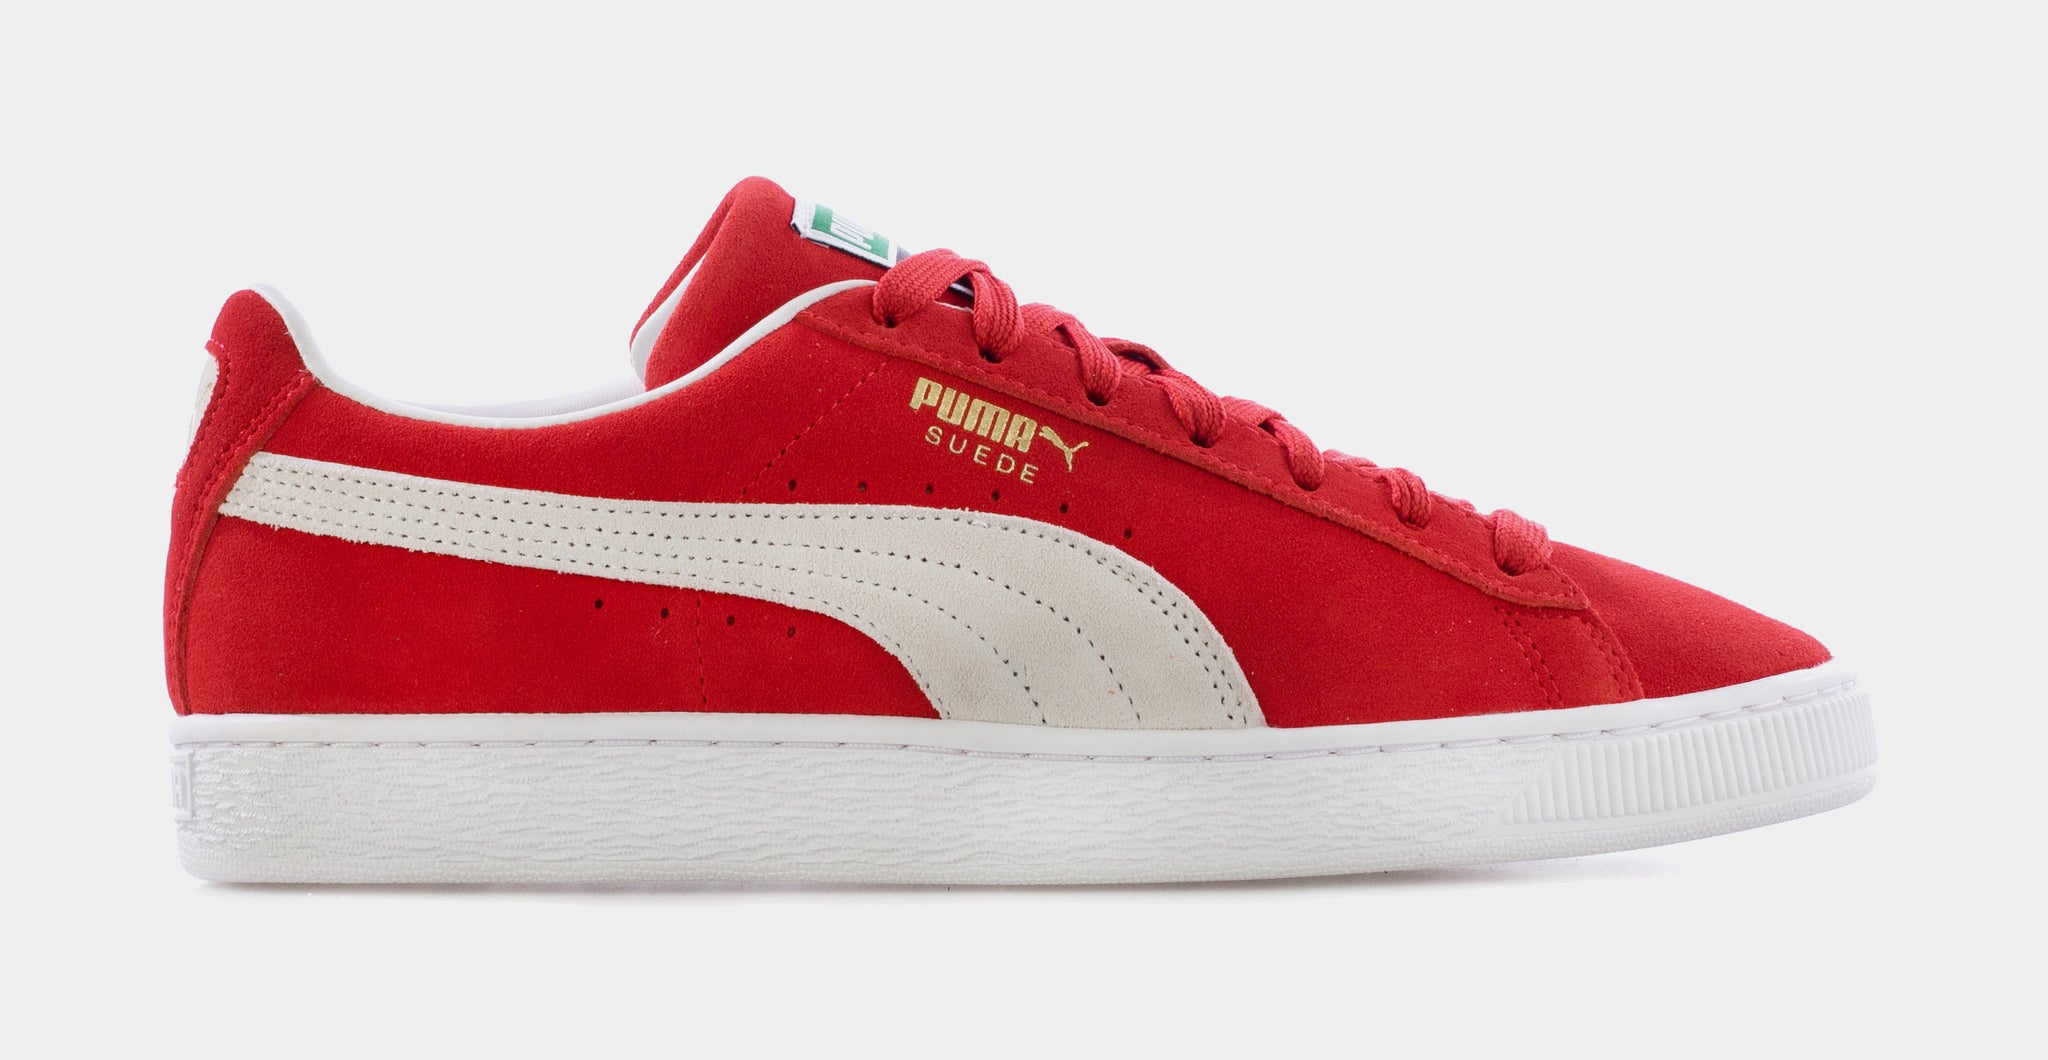 Puma 180 Sneaker | Urban Outfitters